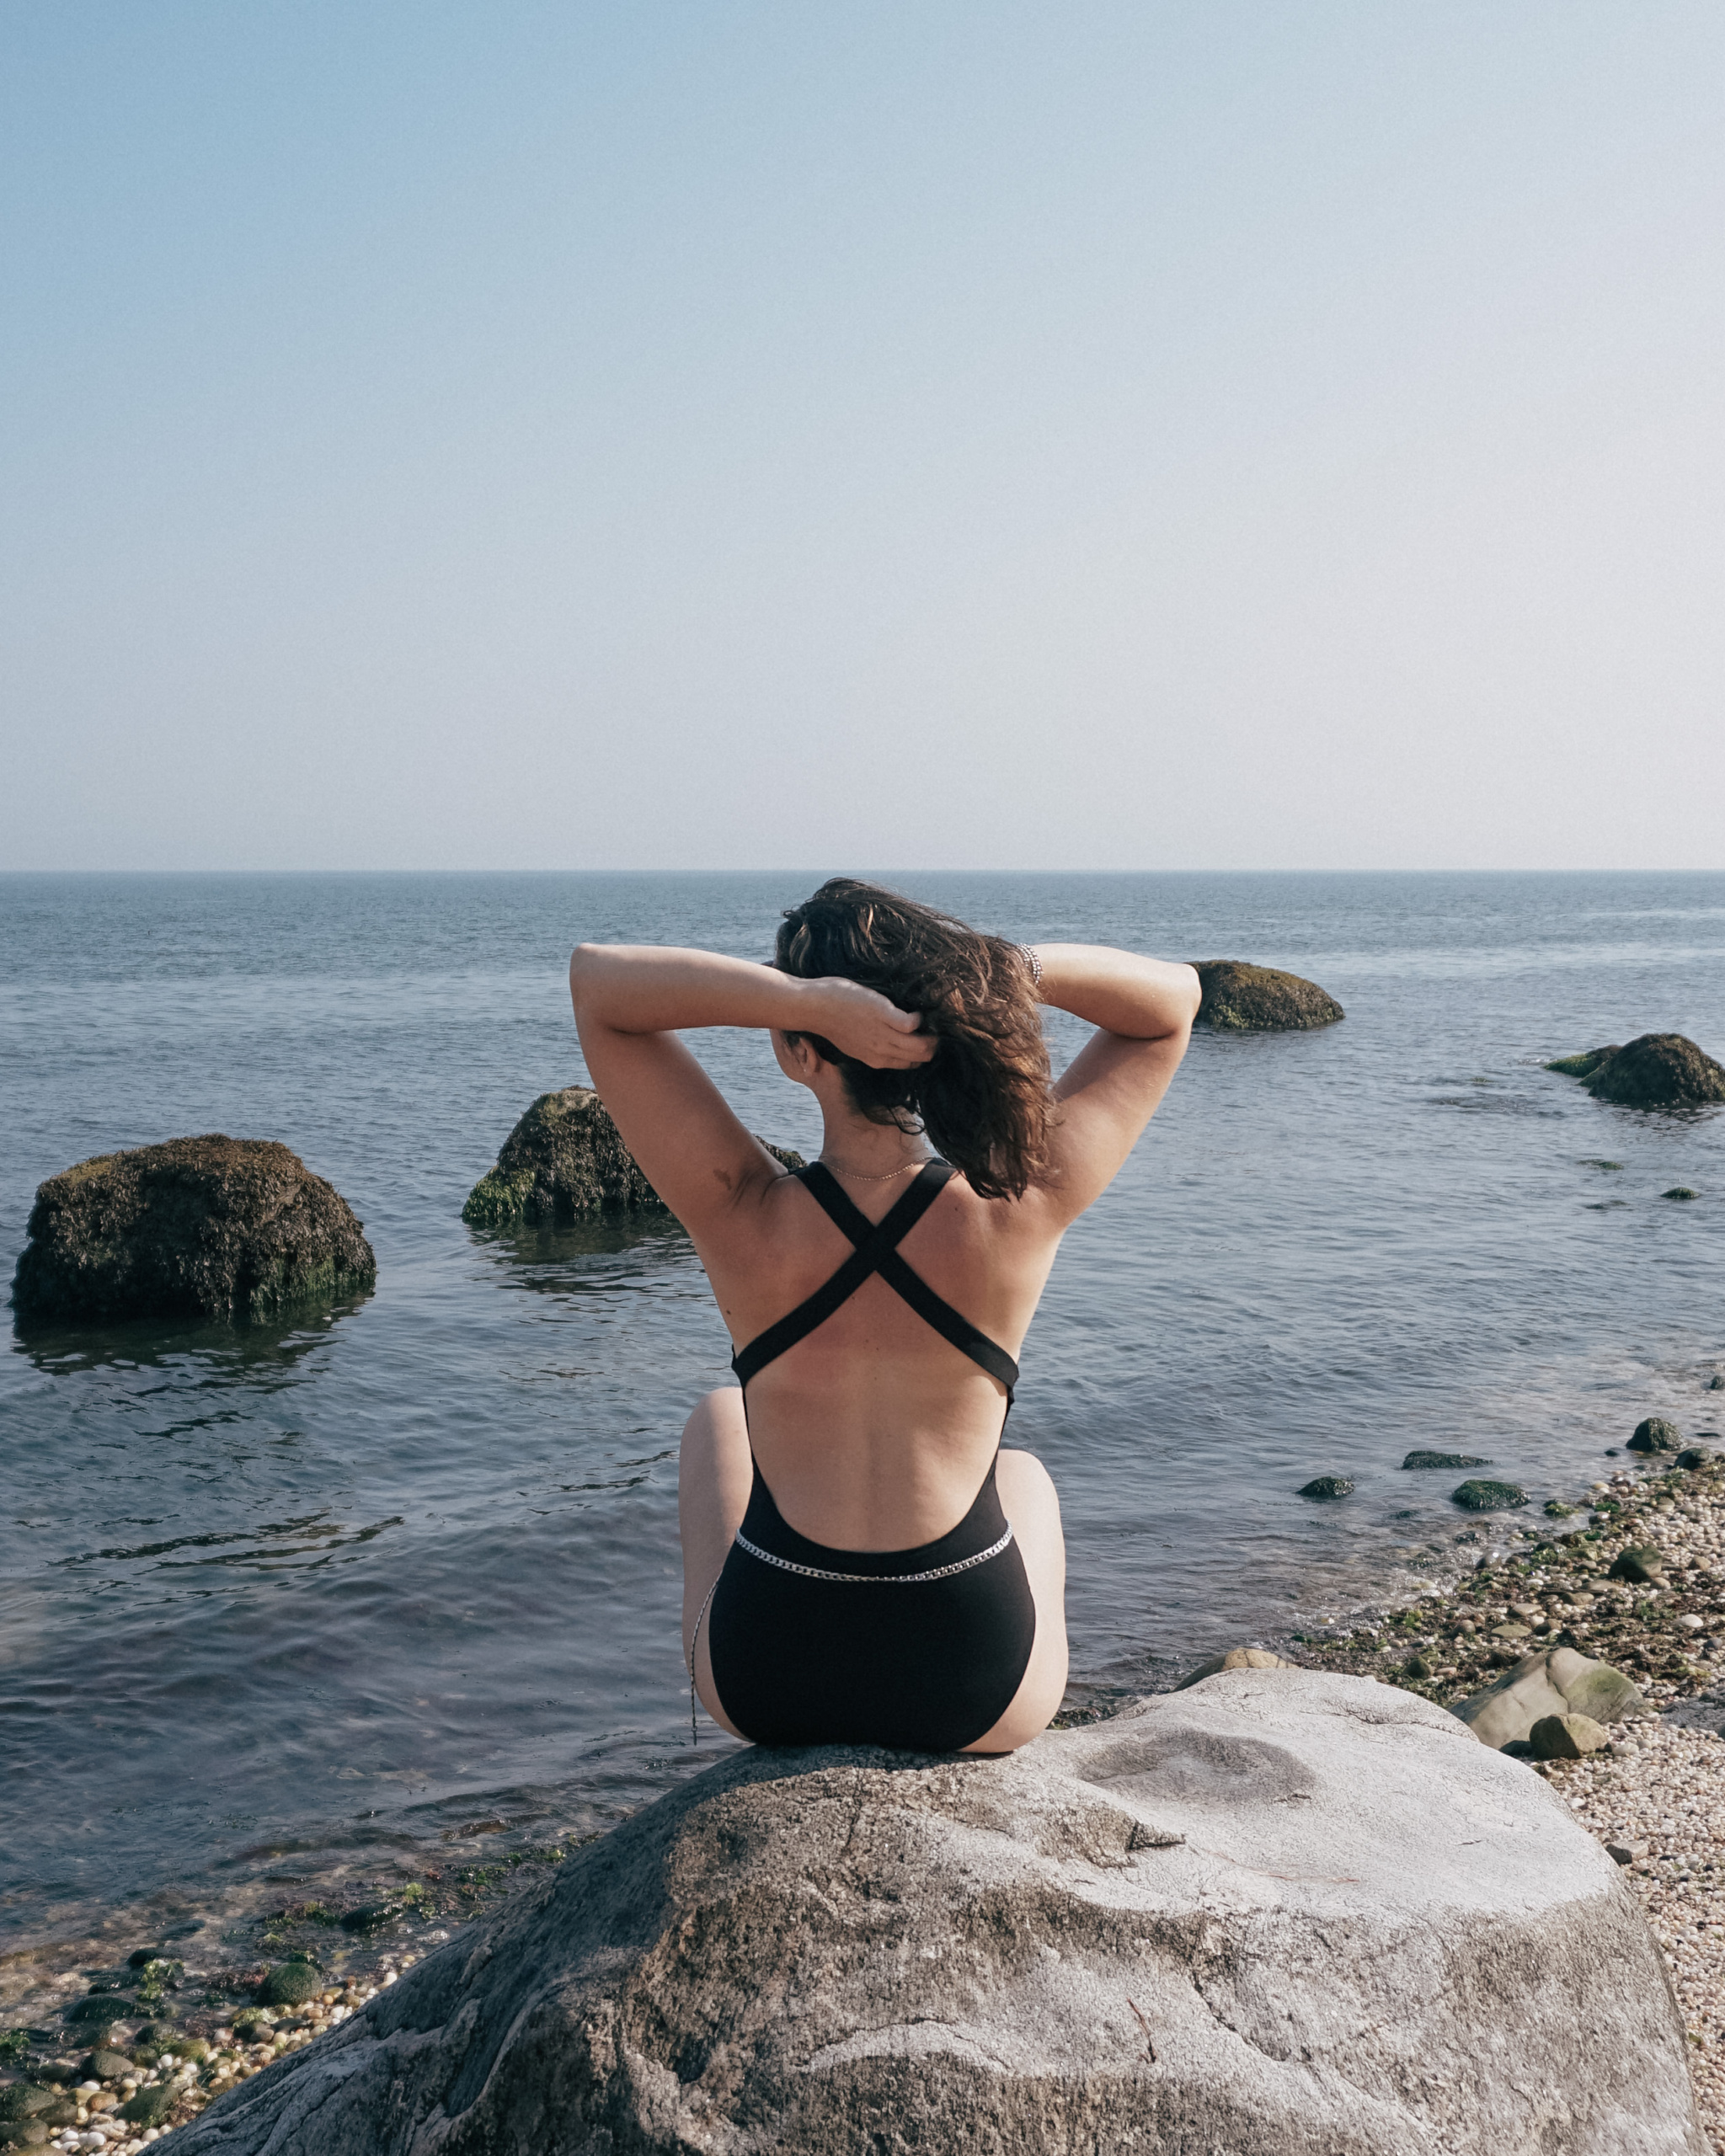 Simply-by-Simone-wearing-black-bathing-suit-at-67-Steps-Beach-greenport-new-york